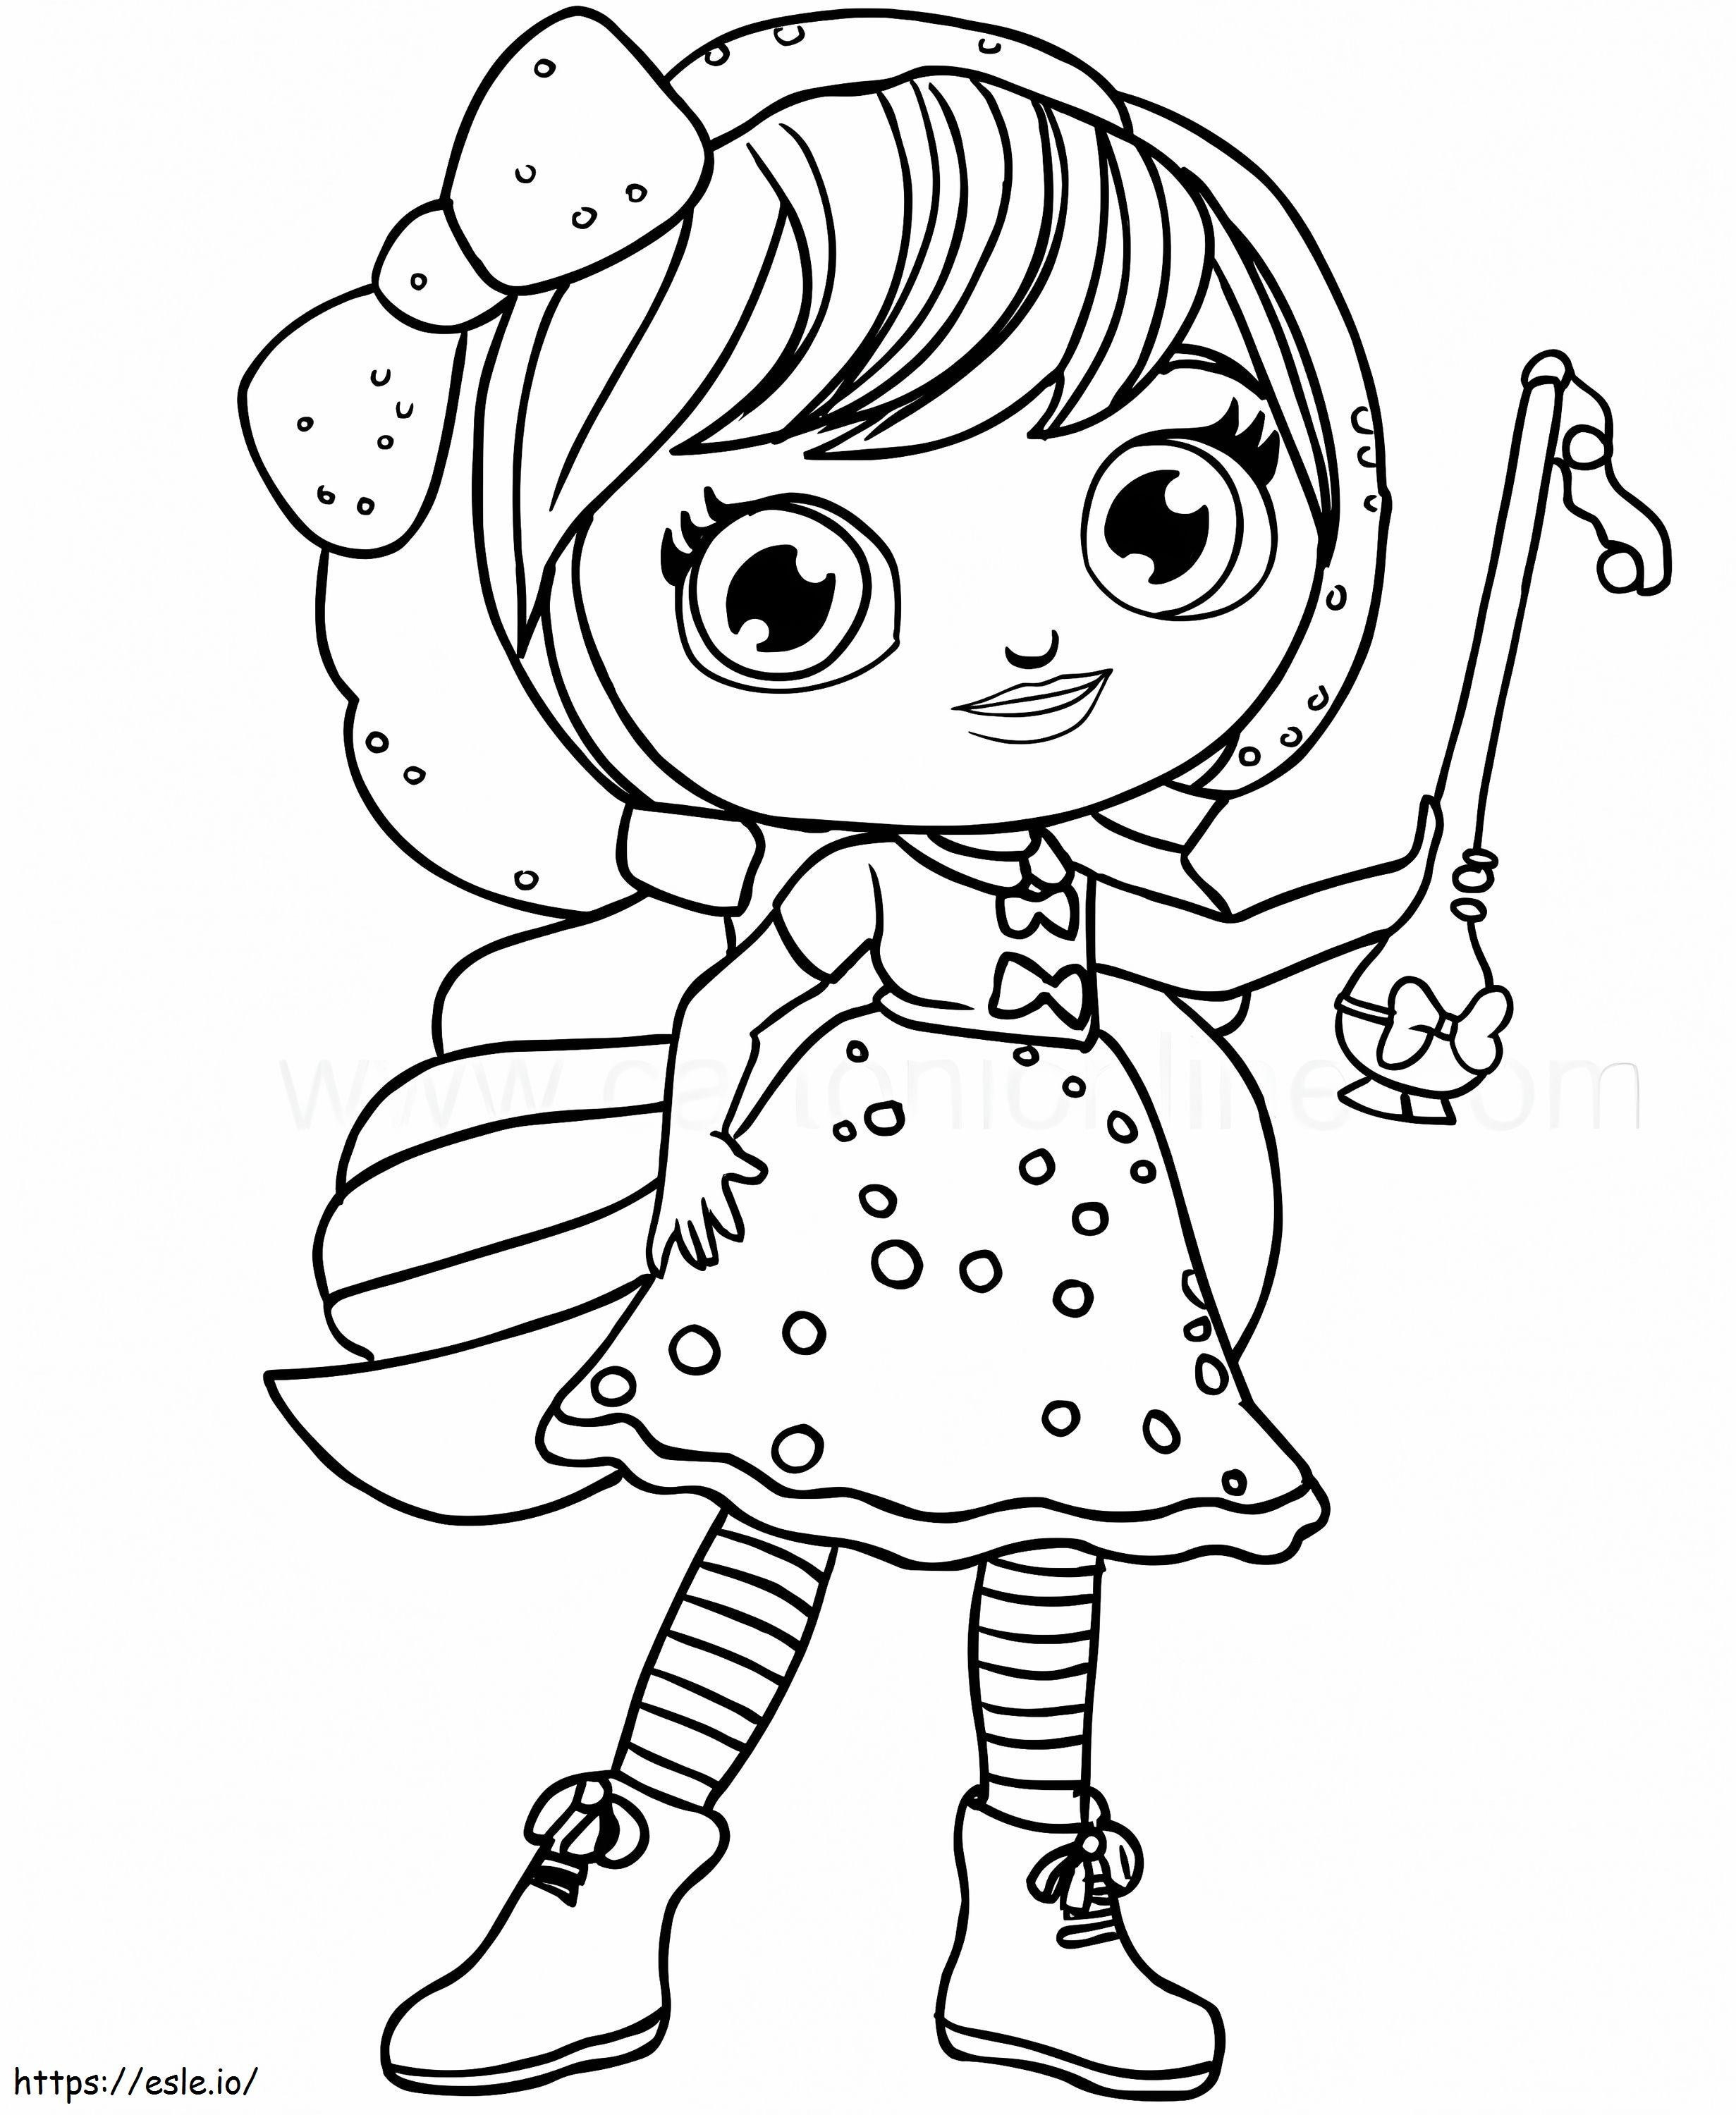 Lavender Little Charmers coloring page